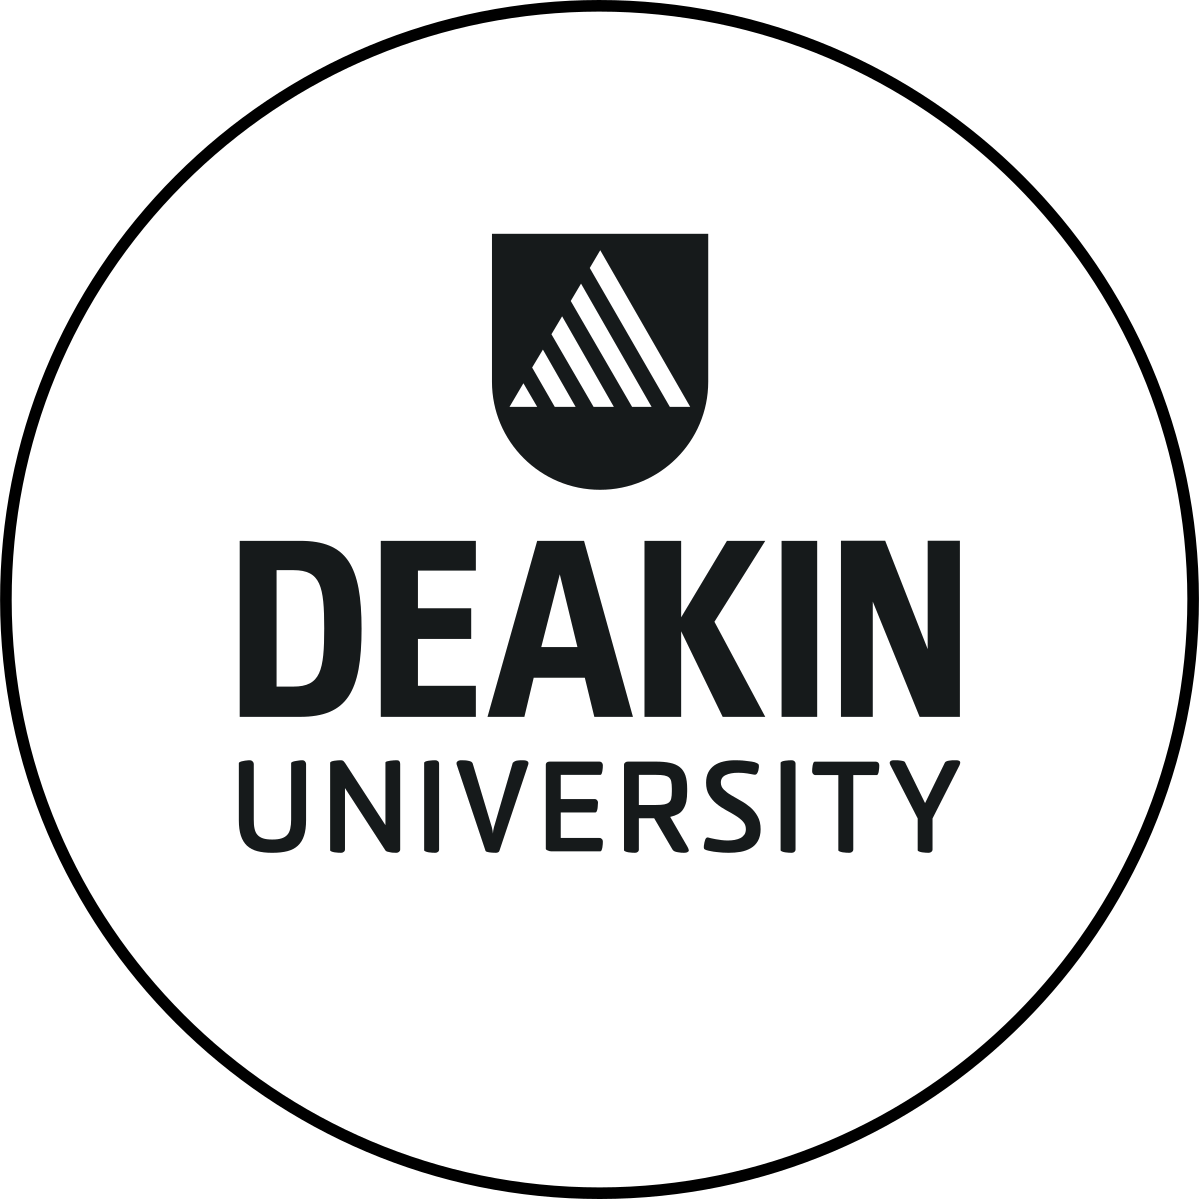 Bachelor of Property and Real Estate/Bachelor of Laws | Bachelor's degree | Business | Blended Learning | 5 years | Deakin University | Australia